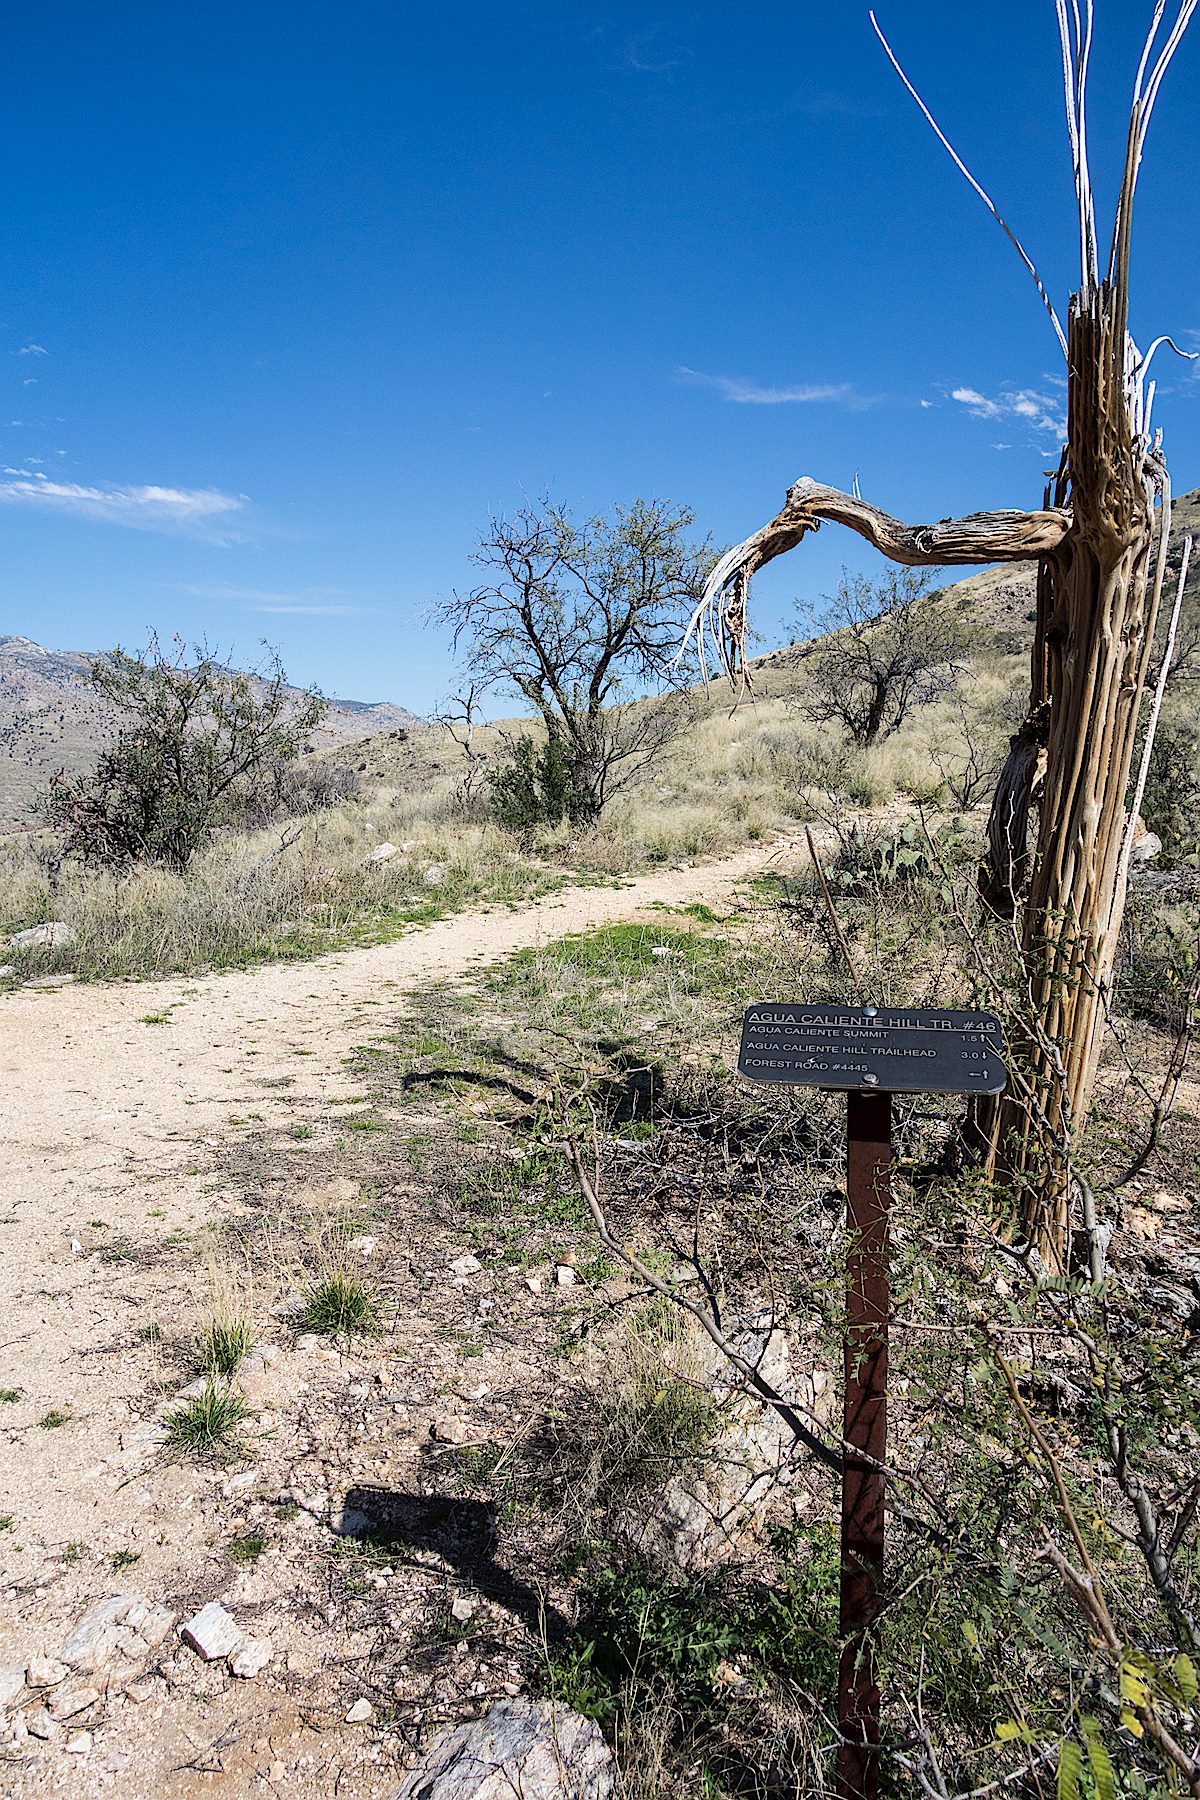 The junction of the Agua Caliente Hill Trail and Forest Road 4445. February 2015.